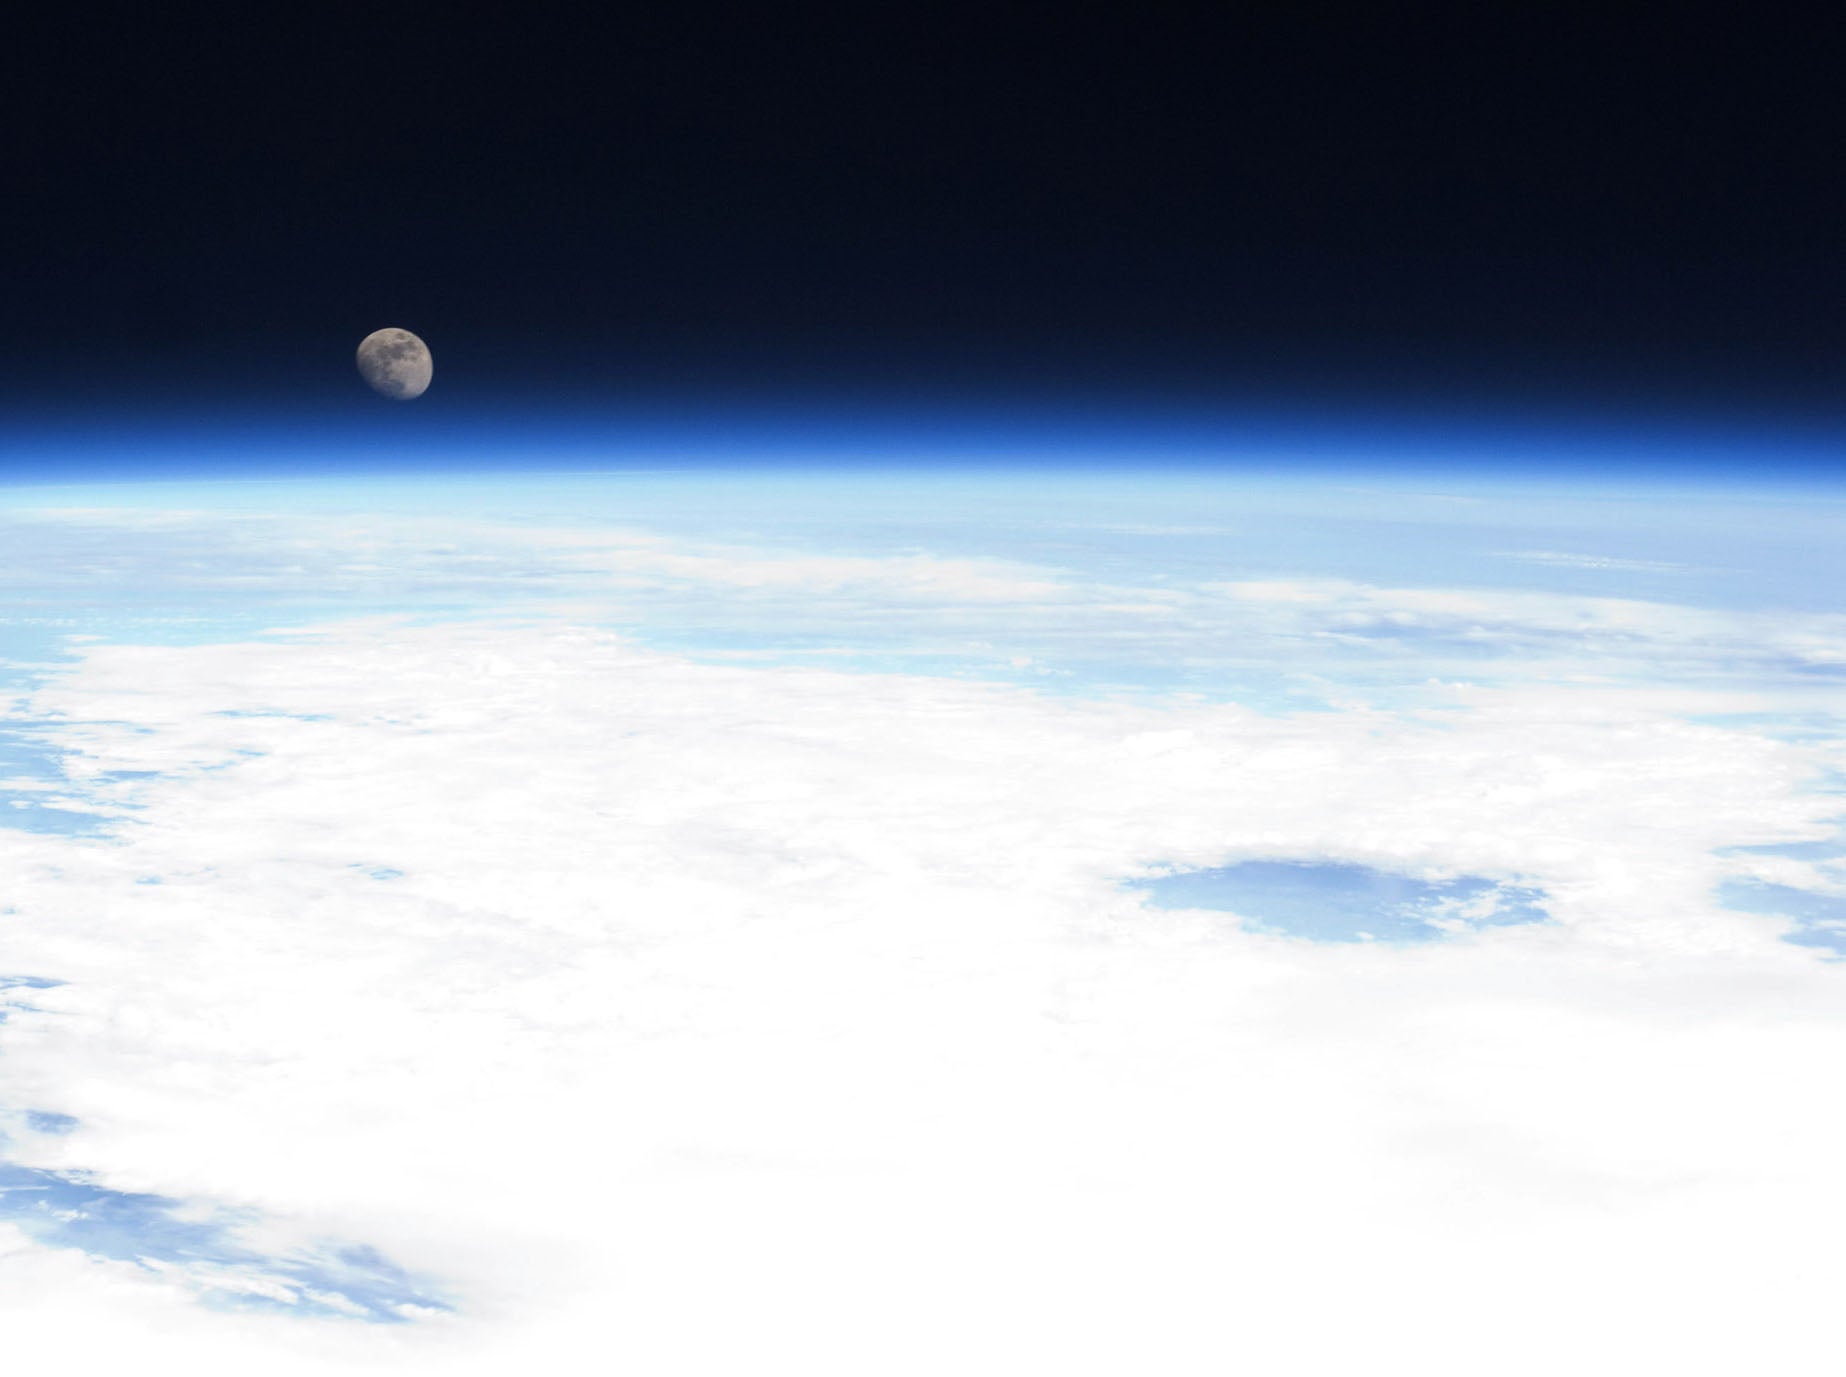 The Earth's horizon and the moon seen from the International Space Station